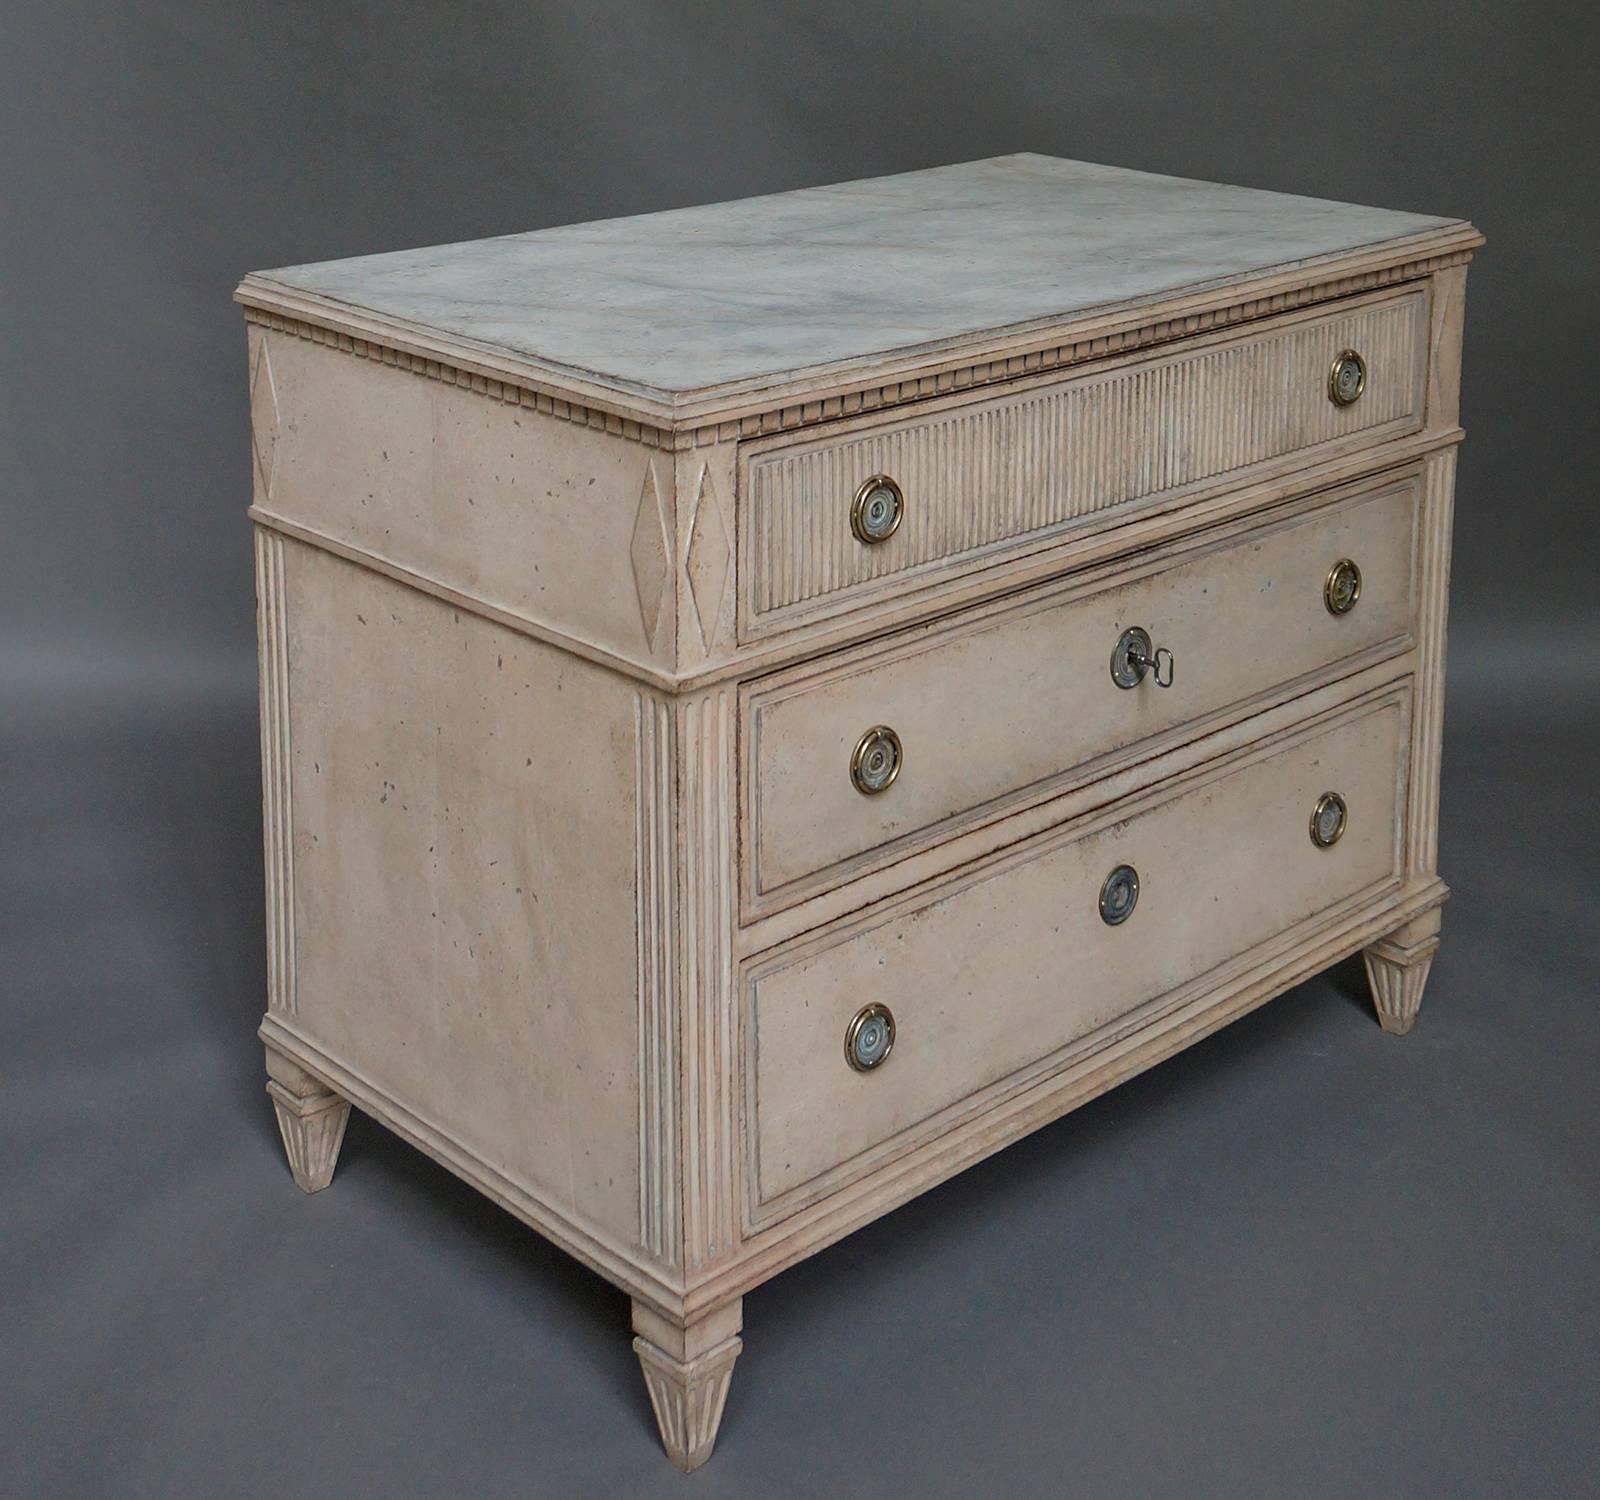 Beautifully detailed Empire chest of drawers in rich antique cream paint, Sweden circa 1880. Each upper corner on the front and sides is accented with an elongated lozenge with reeding below. Each of the three drawers has a raised panel in frame and